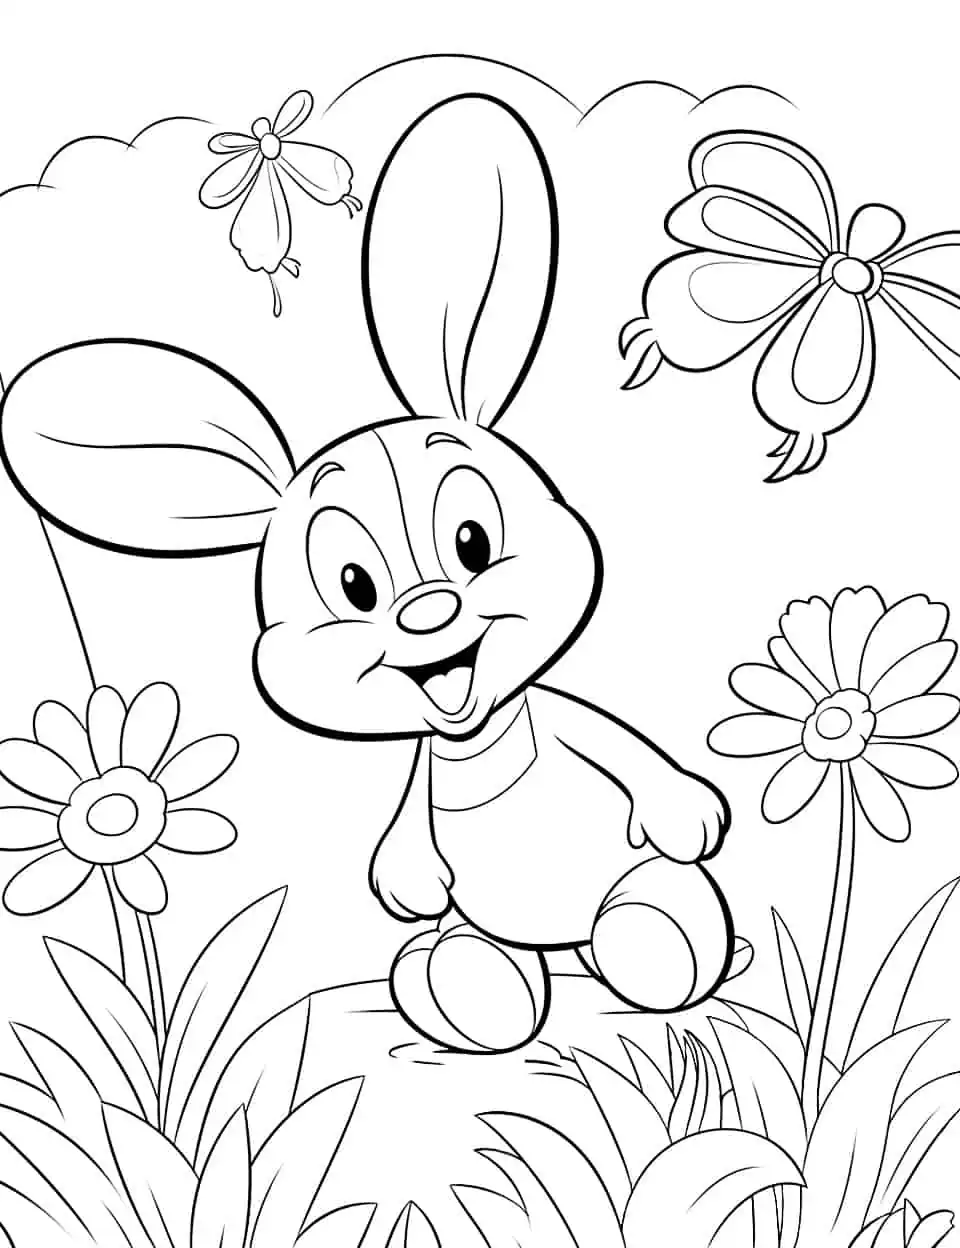 Cute Bunny Spring Flowers Coloring Page - A detailed scene of a cute bunny nestled among spring flowers for older kids.